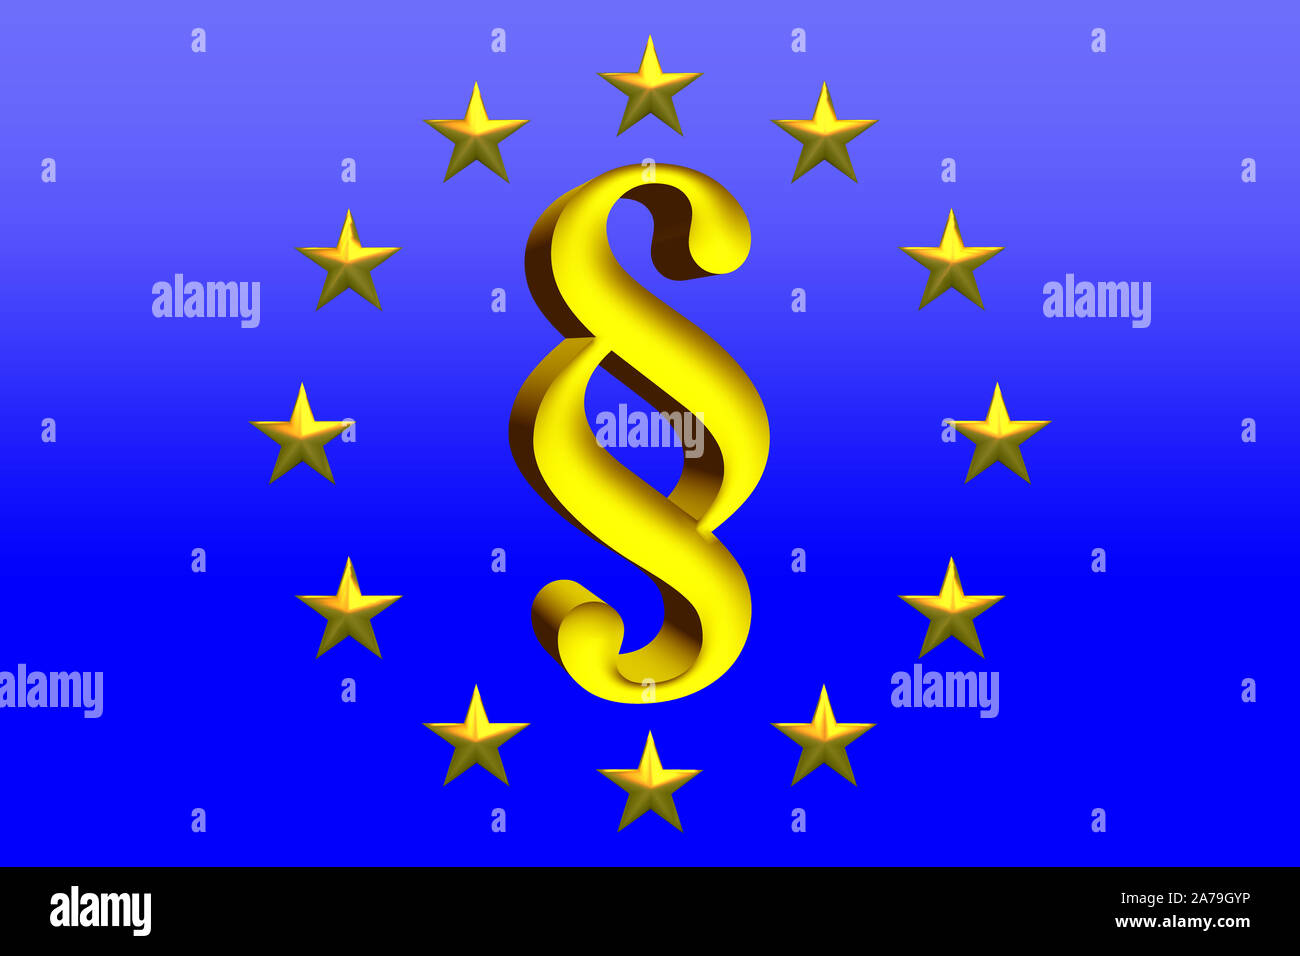 3D Illustration Golden Paragraph Sign with Star Circle on Blue Background Stock Photo